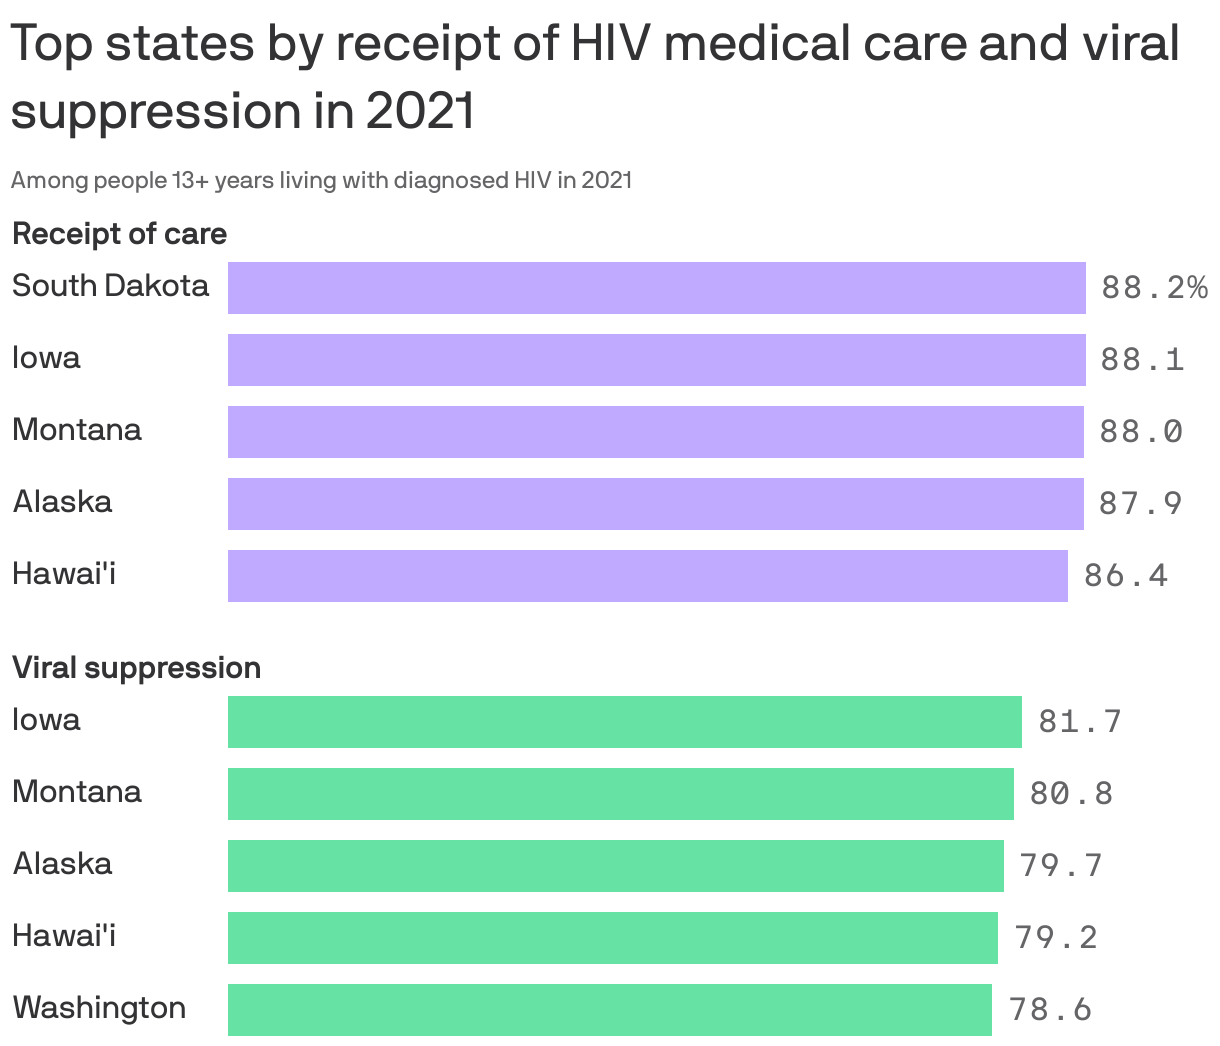 Top states by receipt of HIV medical care and viral suppression in 2021